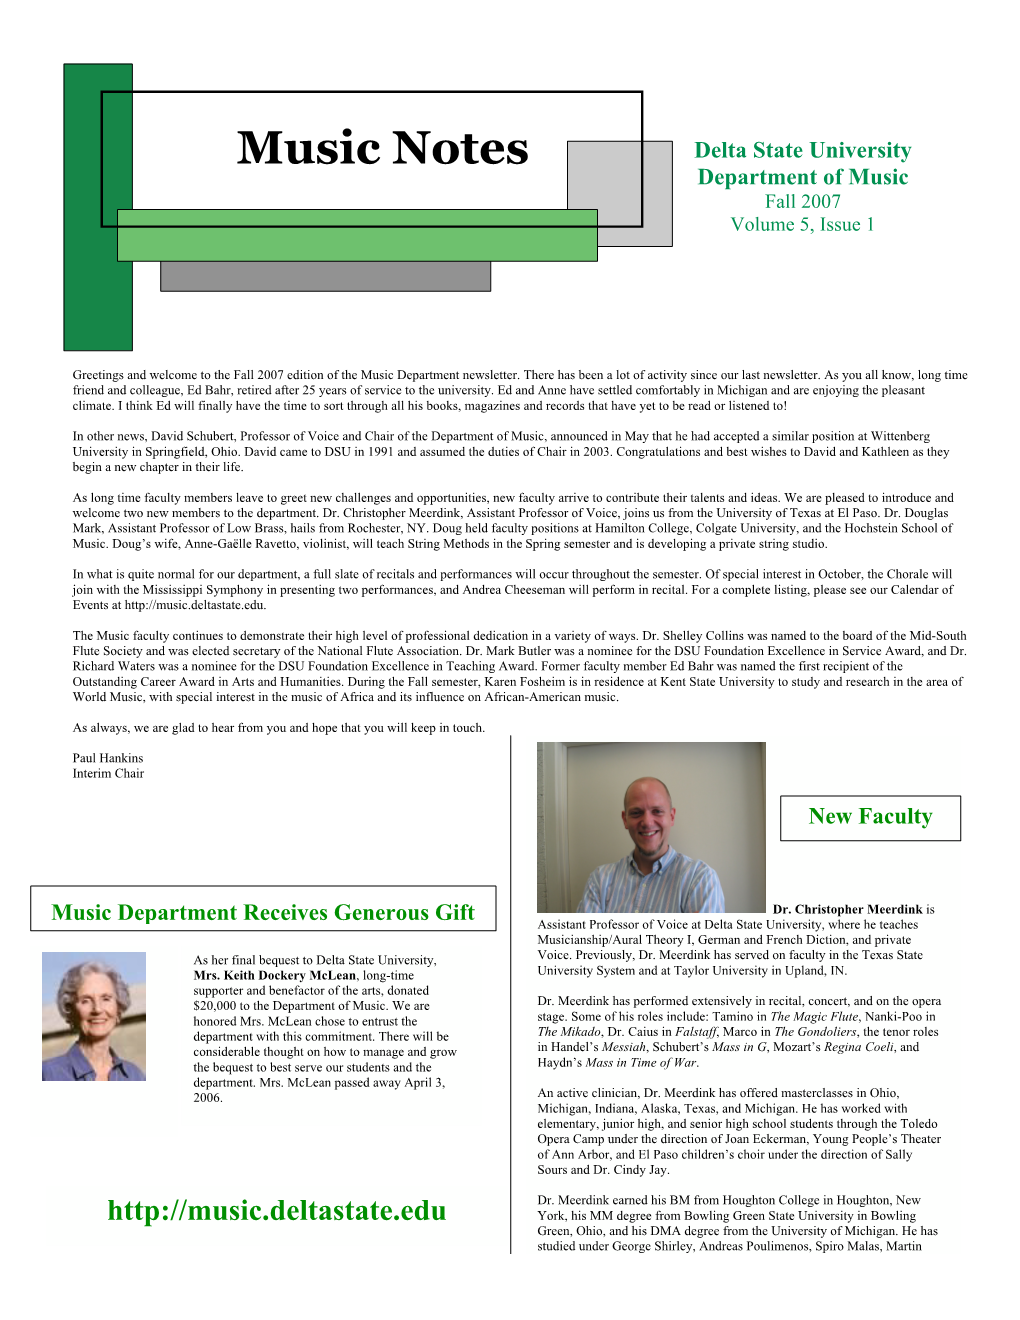 Music Notes Delta State University Department of Music Fall 2007 Volume 5, Issue 1